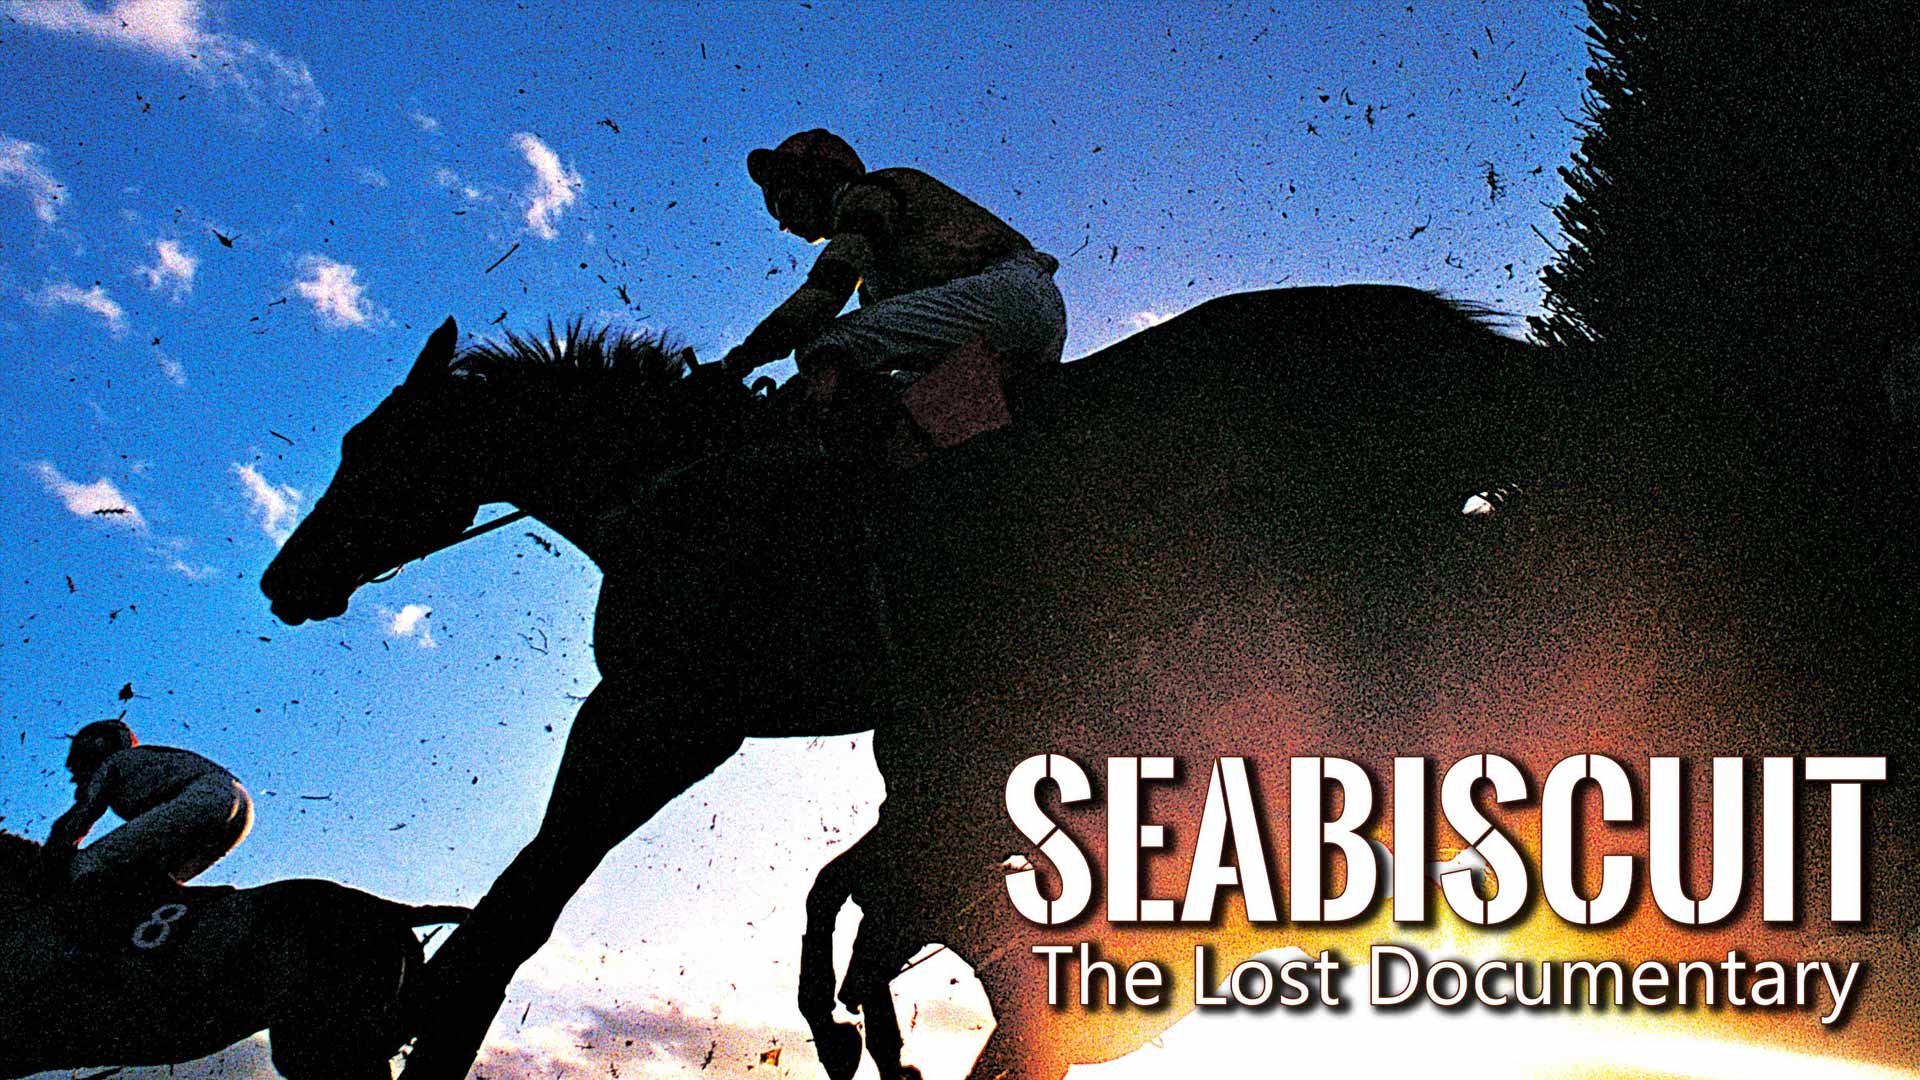 Seabiscuit: The Lost Documentary